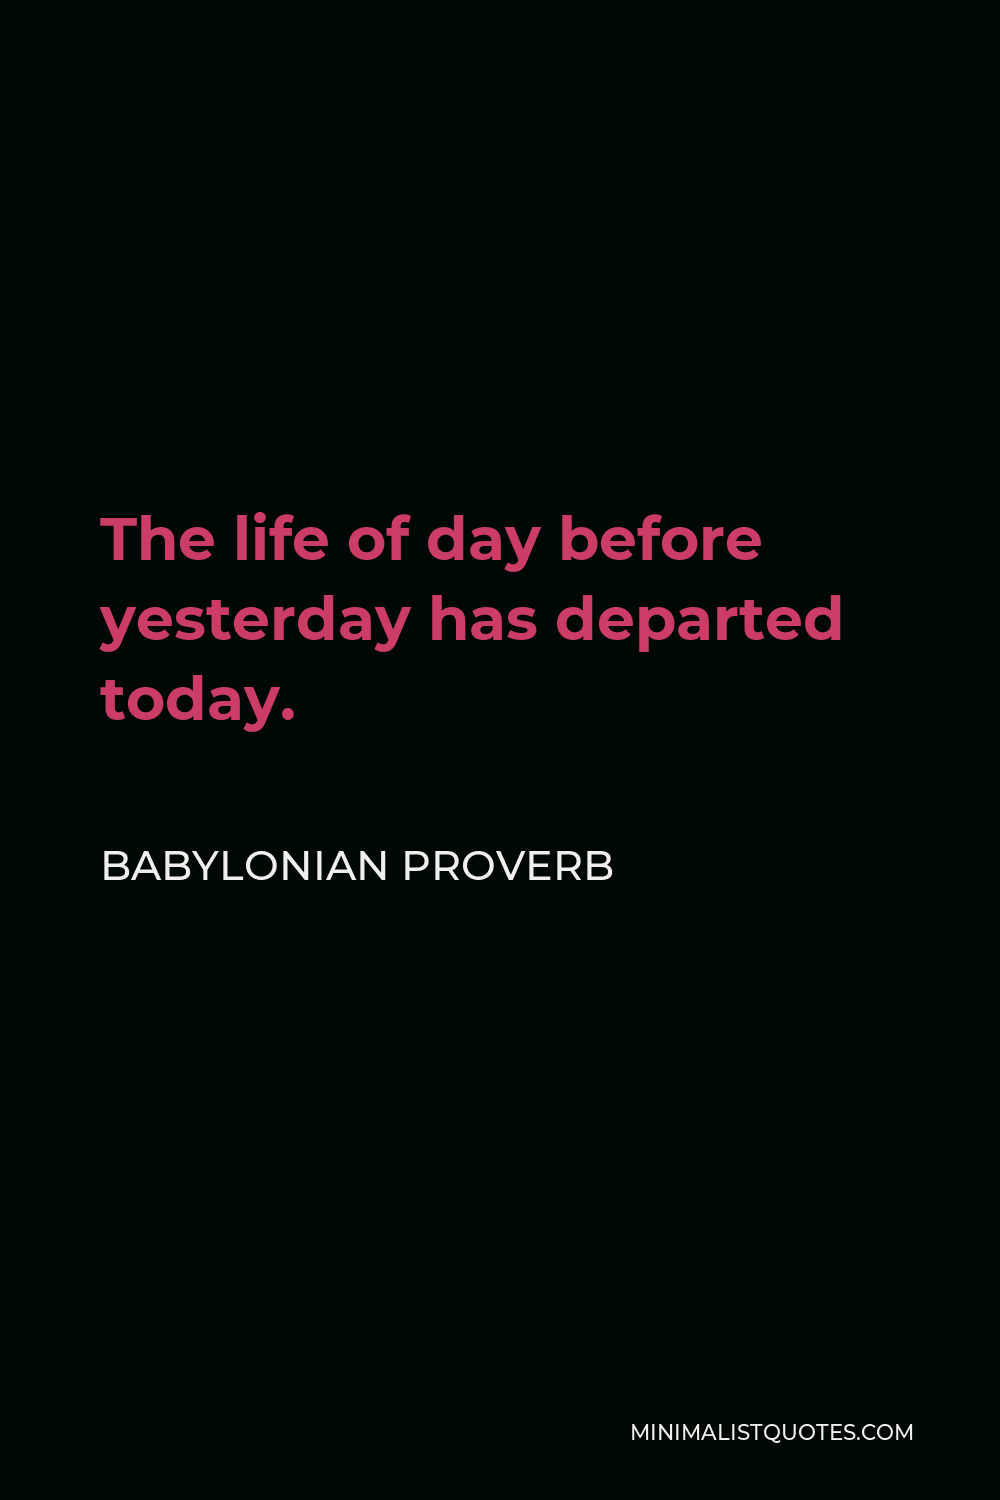 Babylonian Proverb Quote - The life of day before yesterday has departed today.